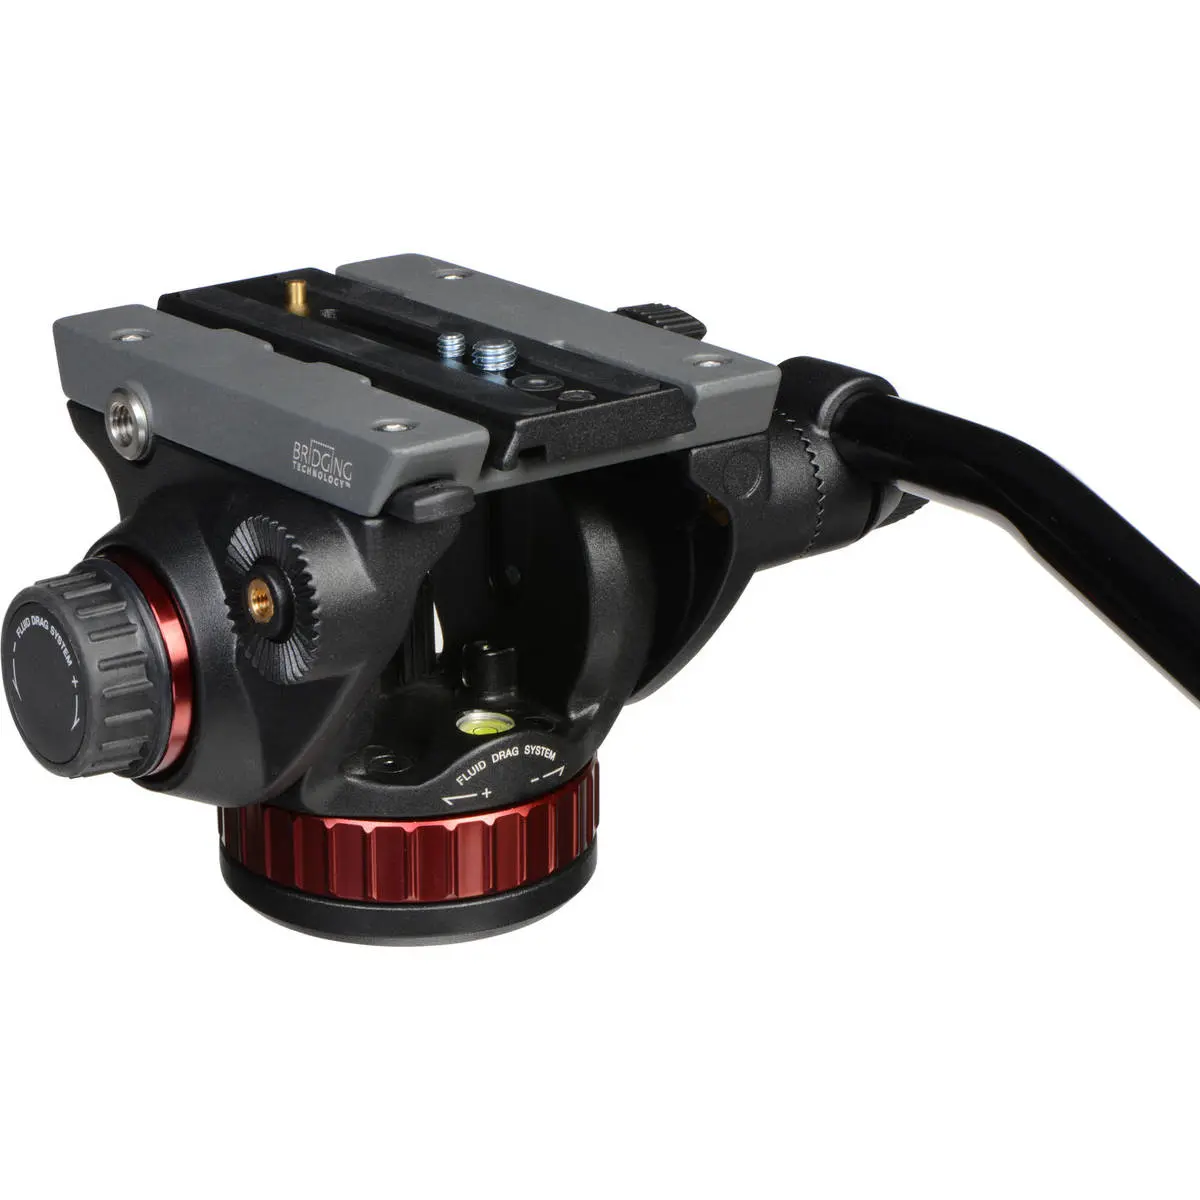 3. Manfrotto MVH502AH Pro Video Head with Flat Base